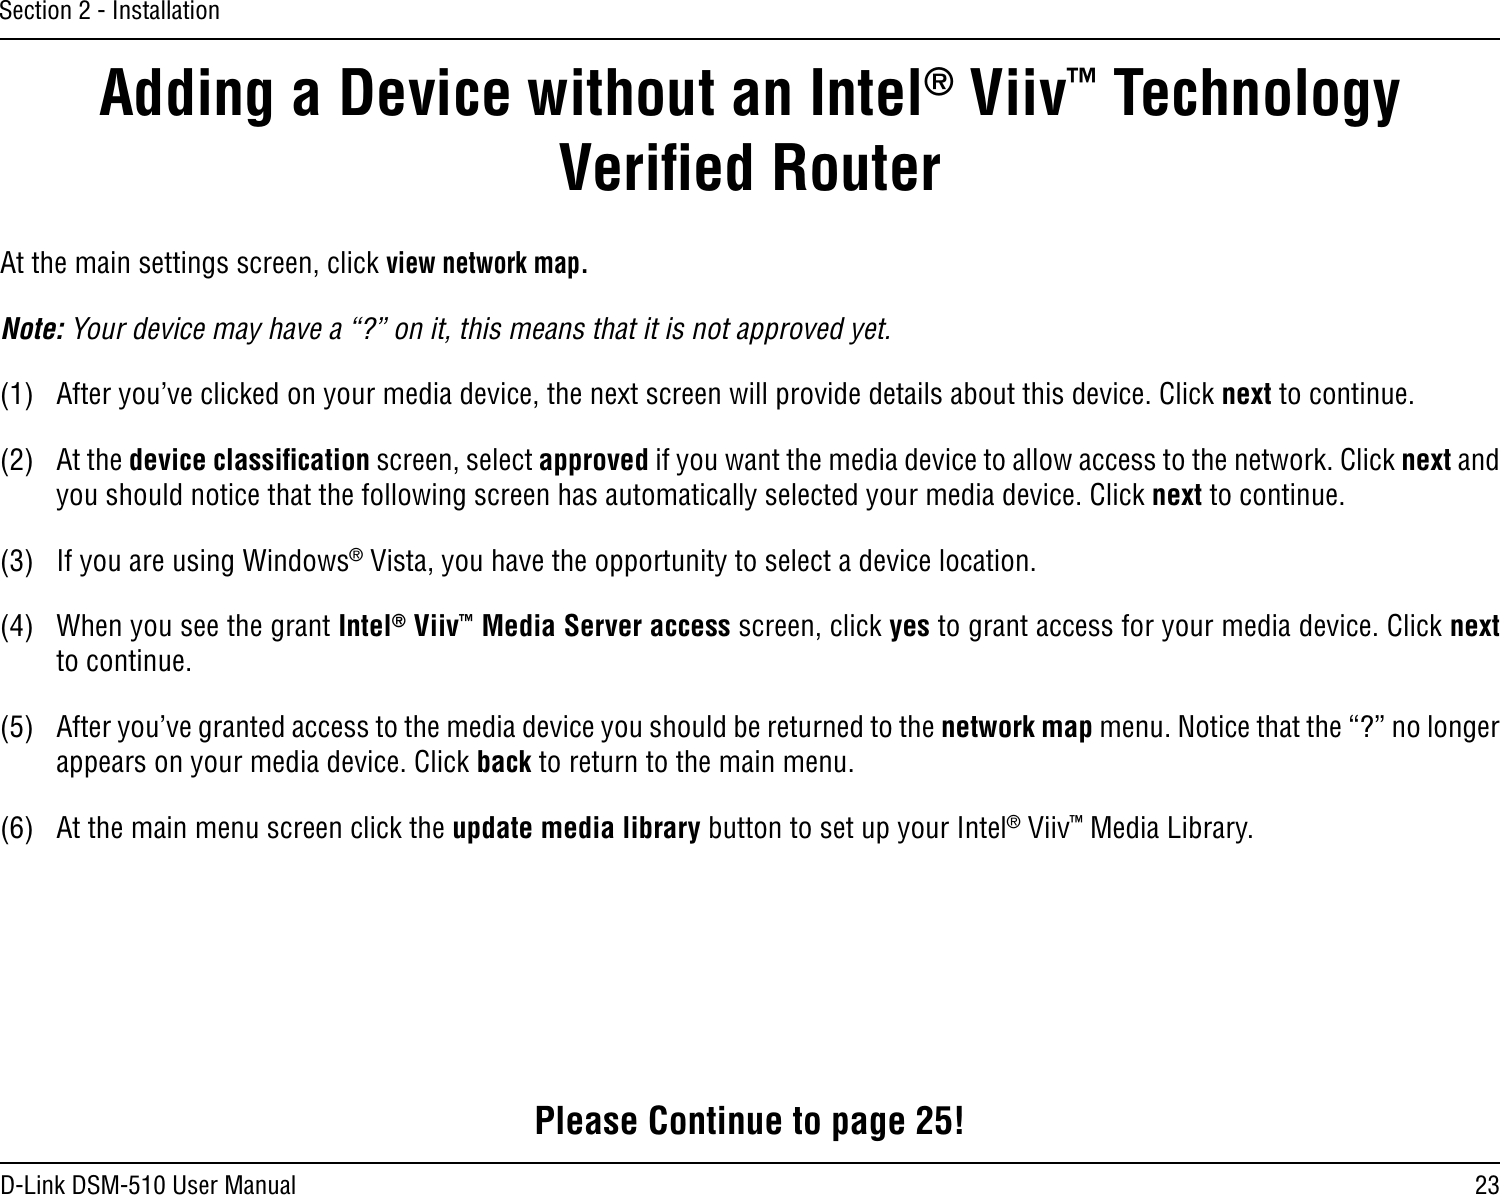 23D-Link DSM-510 User ManualSection 2 - InstallationAdding a Device without an Intel® Viiv™ Technology Veriﬁed RouterAt the main settings screen, click view network map.Note: Your device may have a “?” on it, this means that it is not approved yet.(1)  After you’ve clicked on your media device, the next screen will provide details about this device. Click next to continue.(2)  At the device classiﬁcation screen, select approved if you want the media device to allow access to the network. Click next and you should notice that the following screen has automatically selected your media device. Click next to continue.(3)  If you are using Windows® Vista, you have the opportunity to select a device location.(4)  When you see the grant Intel® Viiv™ Media Server access screen, click yes to grant access for your media device. Click next to continue.(5)  After you’ve granted access to the media device you should be returned to the network map menu. Notice that the “?” no longer appears on your media device. Click back to return to the main menu.(6)  At the main menu screen click the update media library button to set up your Intel® Viiv™ Media Library.Please Continue to page 25!